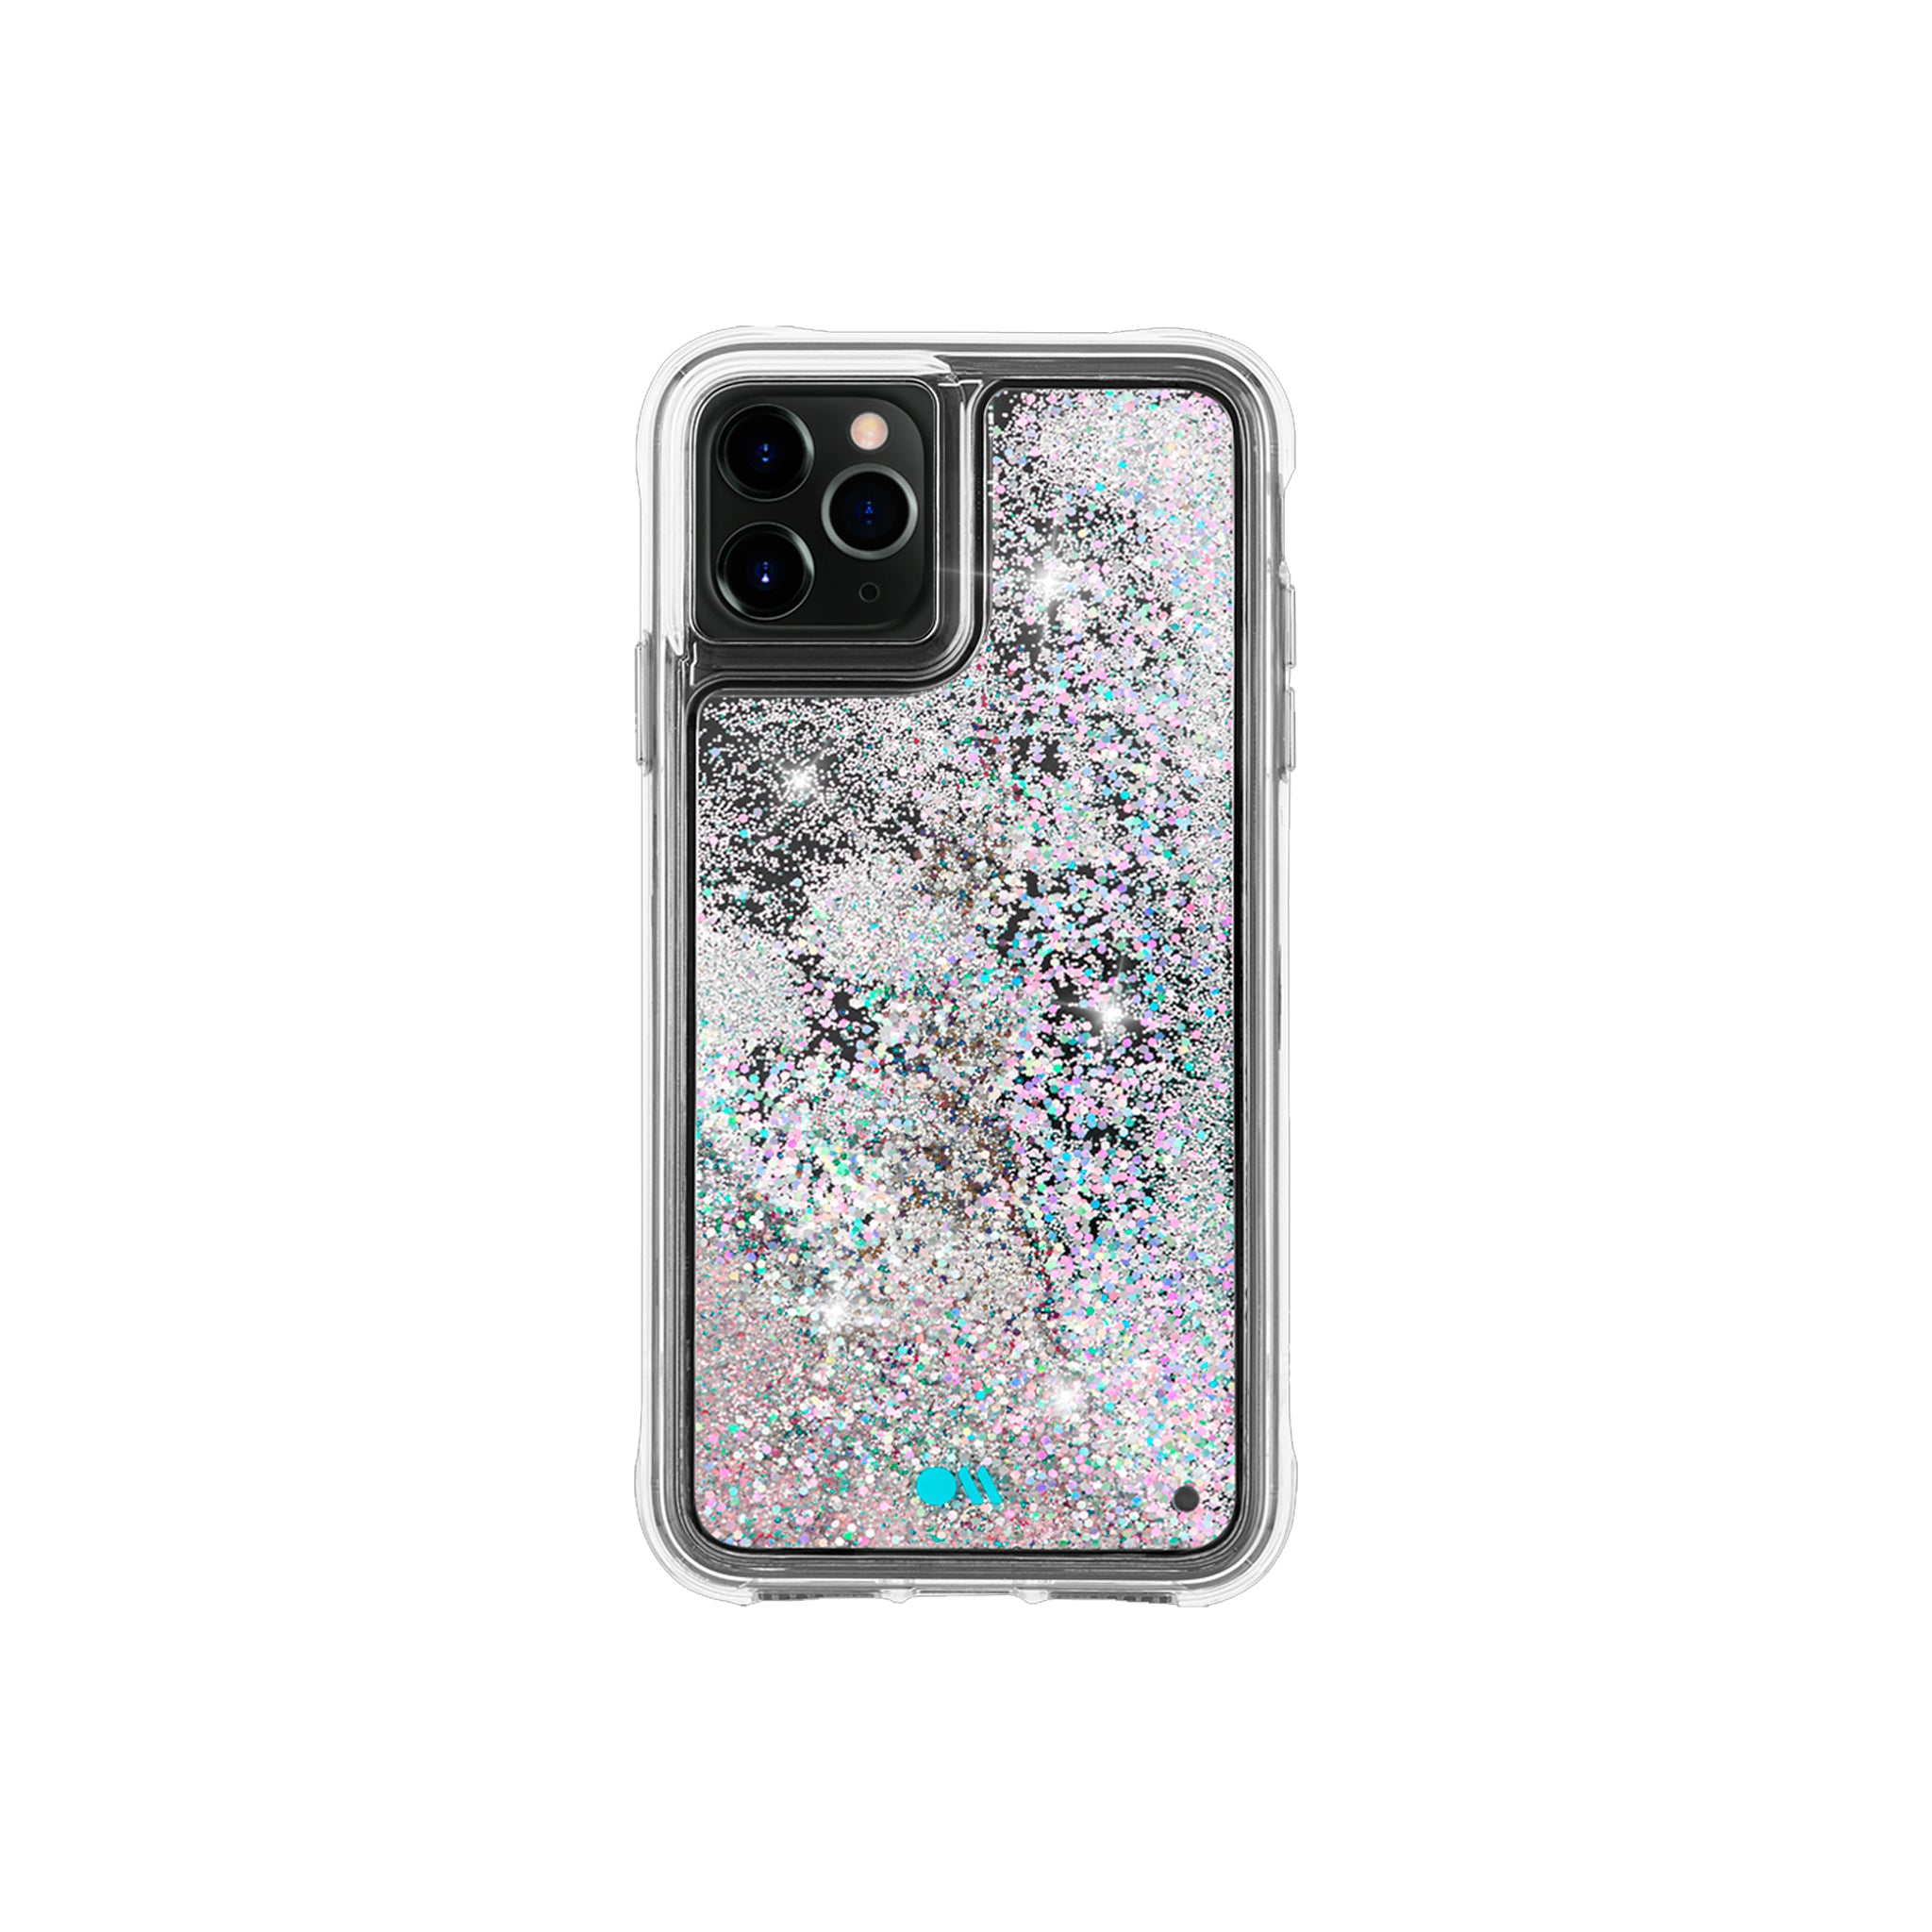 Case-mate - Waterfall Case For Apple iPhone 11 Pro - Iridescent